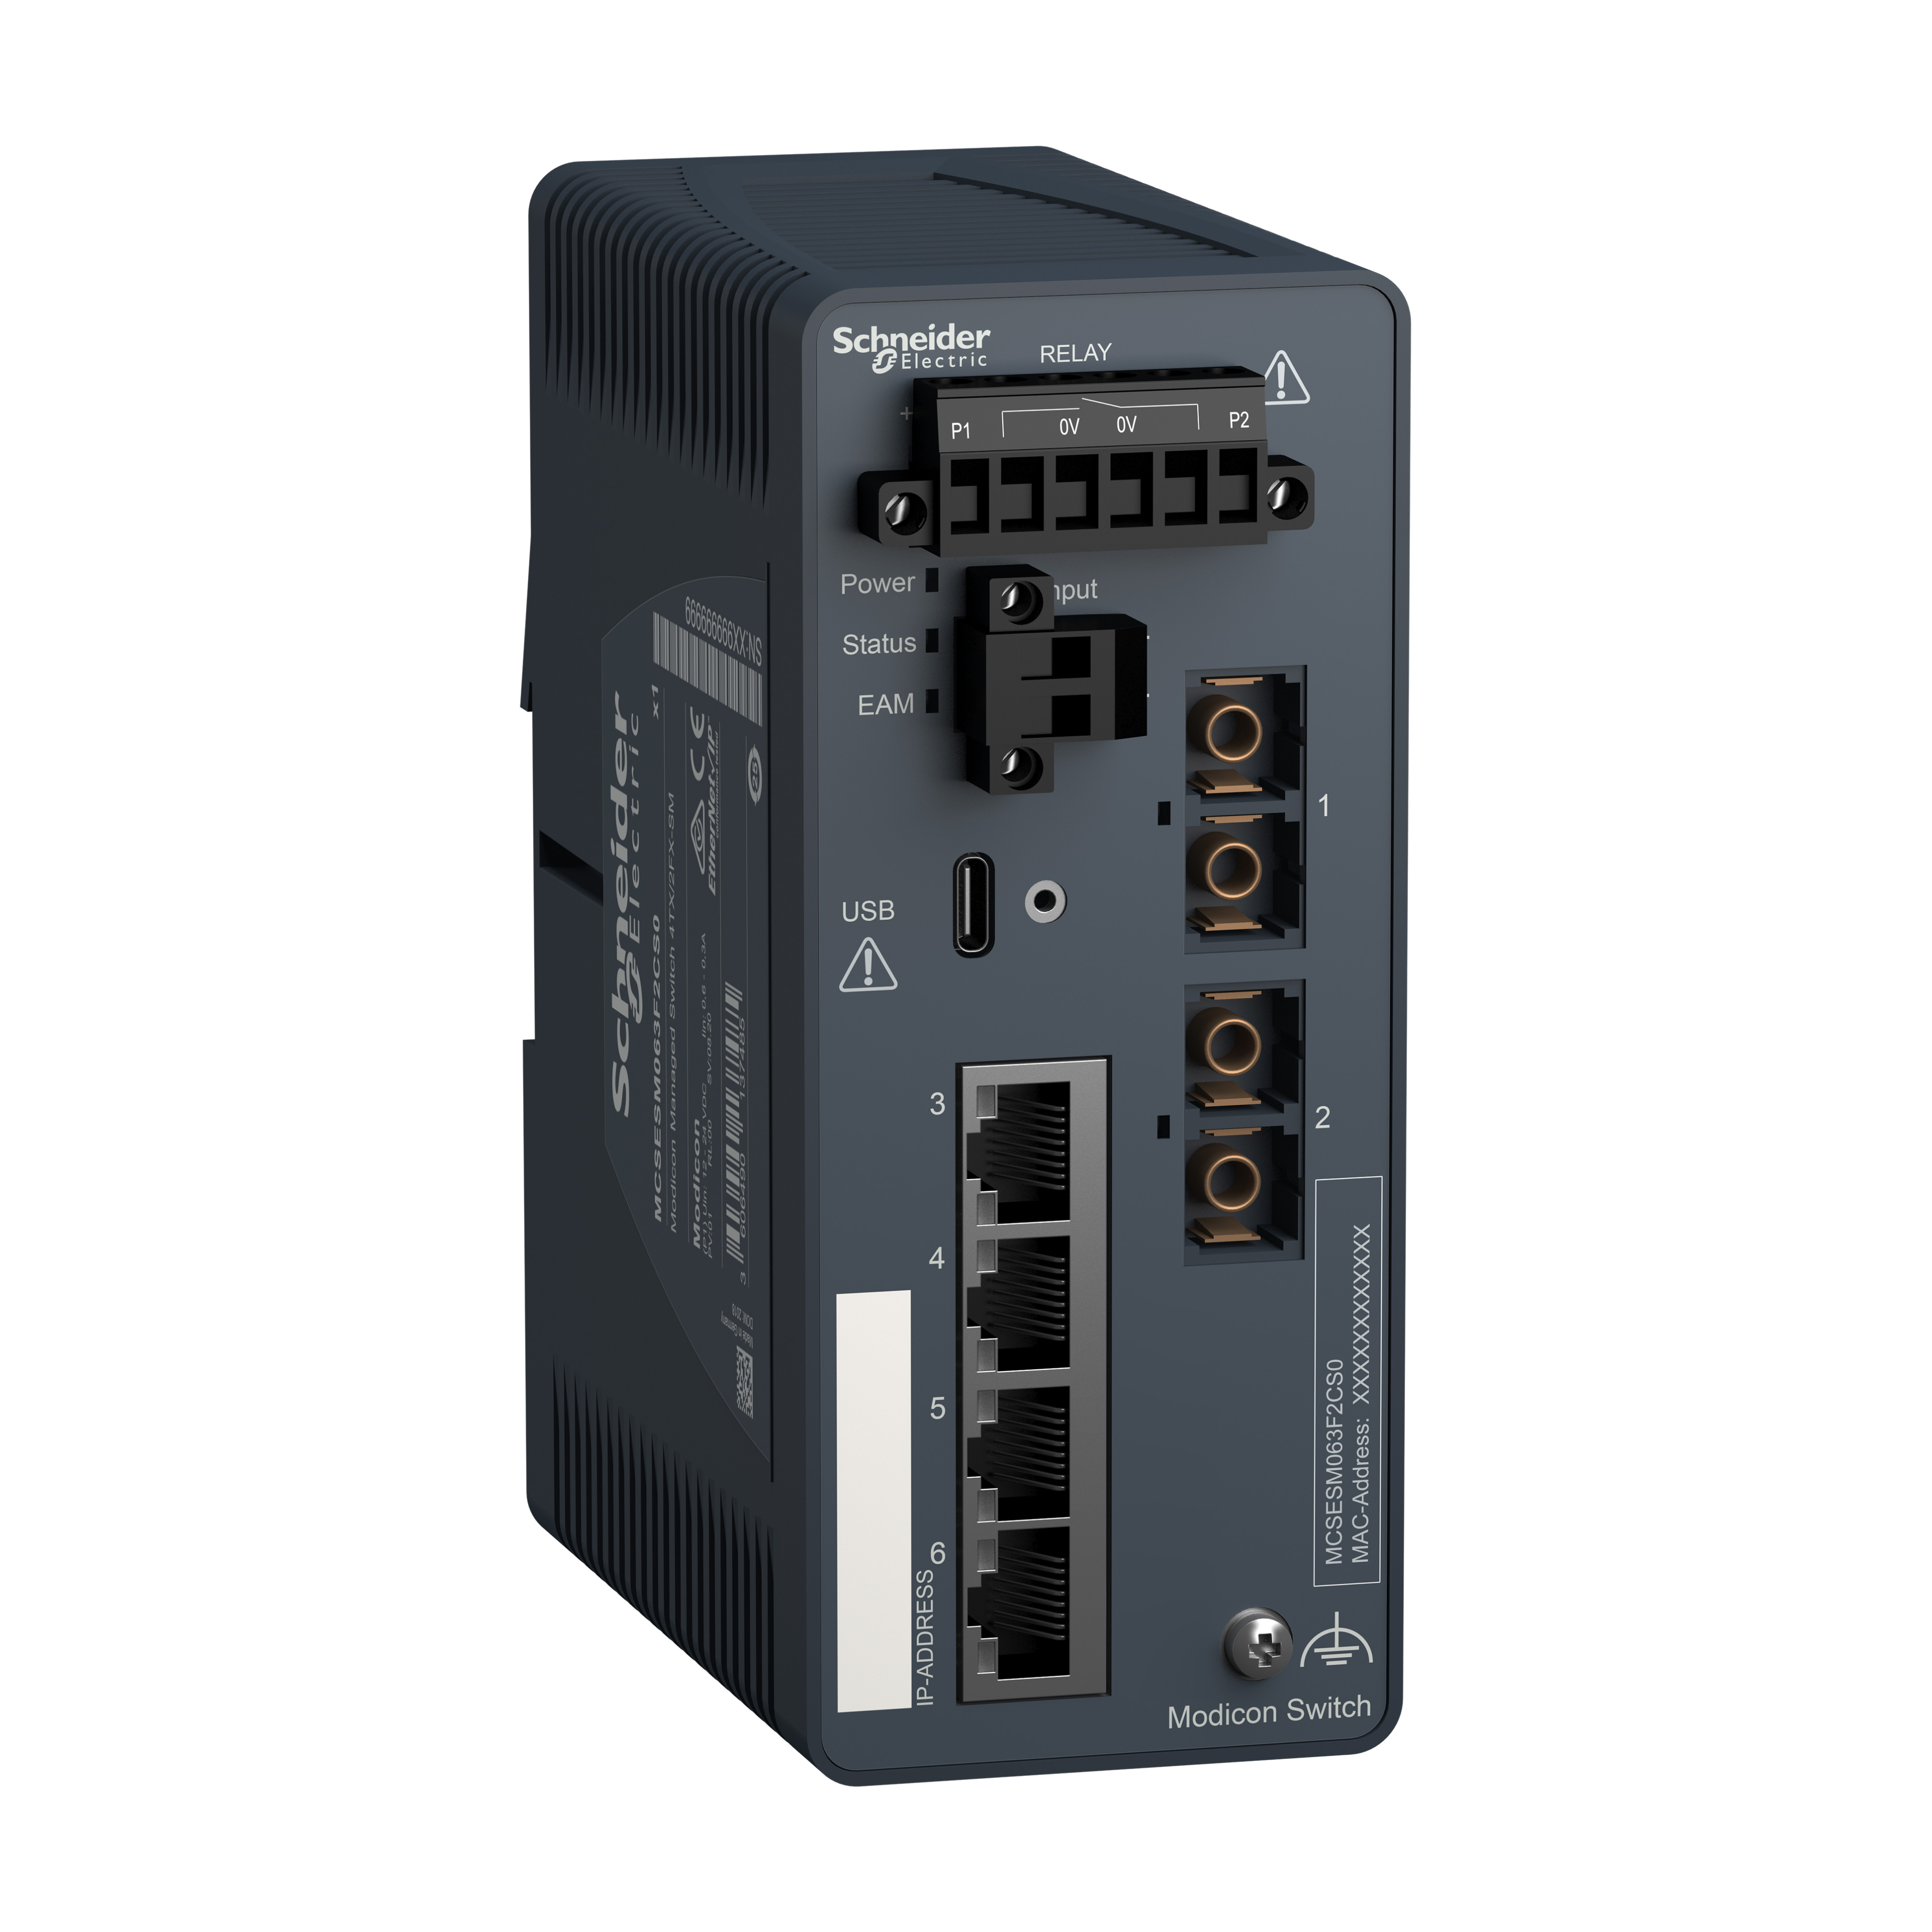 Modicon Managed Switch - 4 ports for copper + 2 ports for fiber optic single-mode